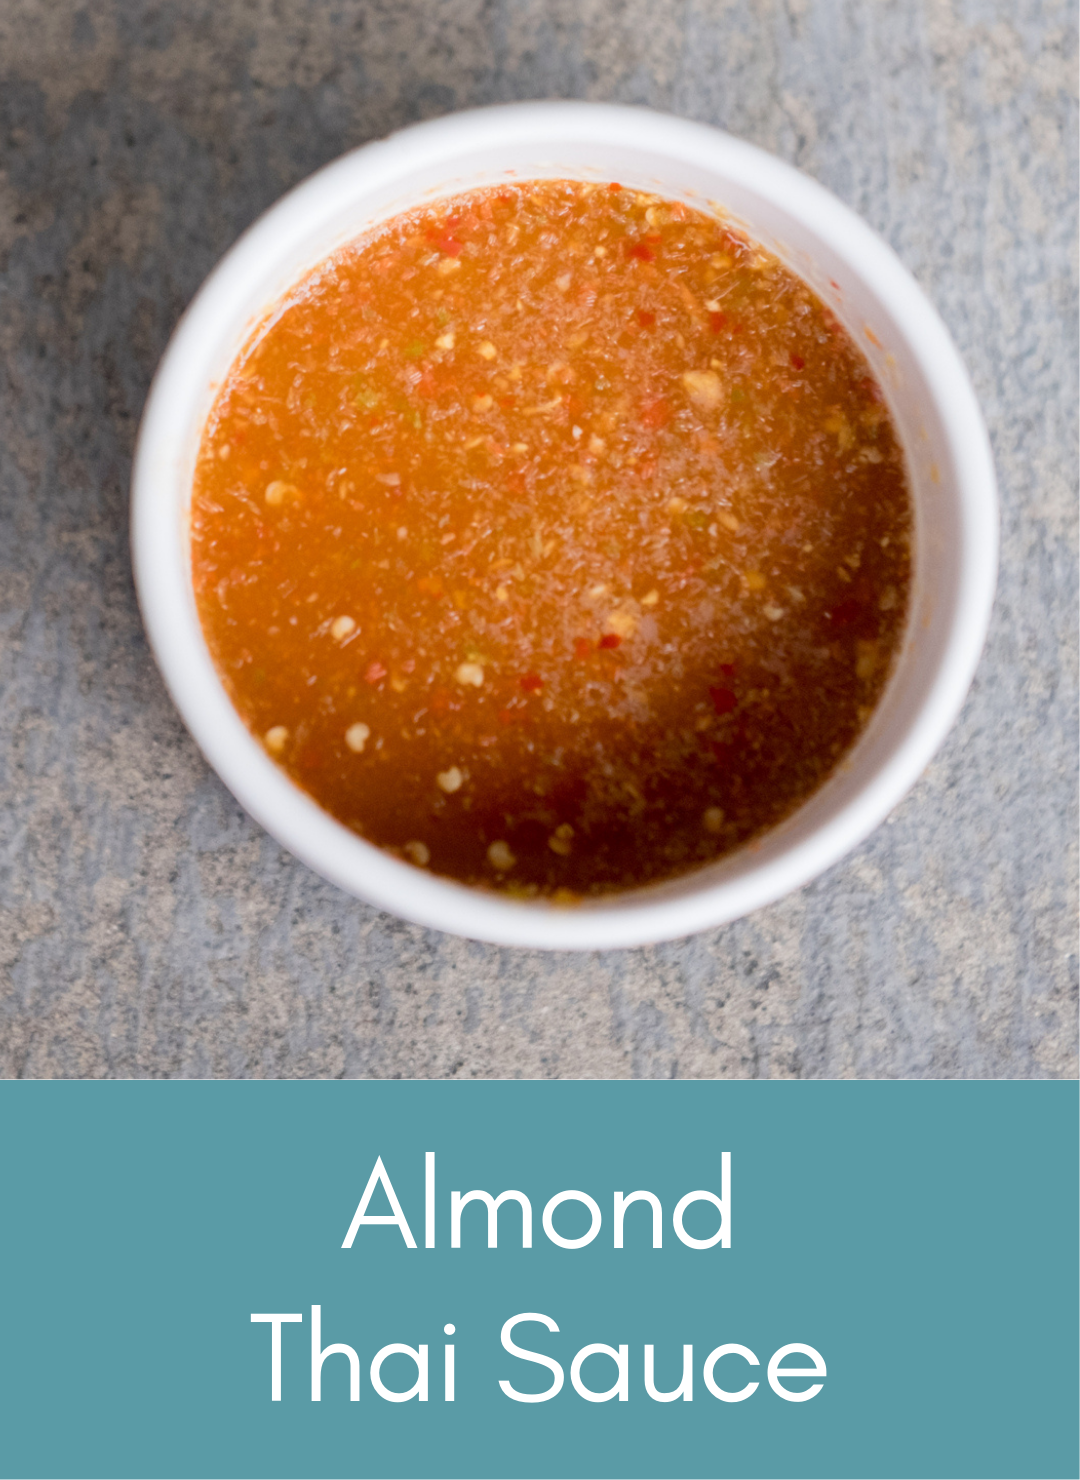 Vegan almond Thai sauce Picture with link to recipe